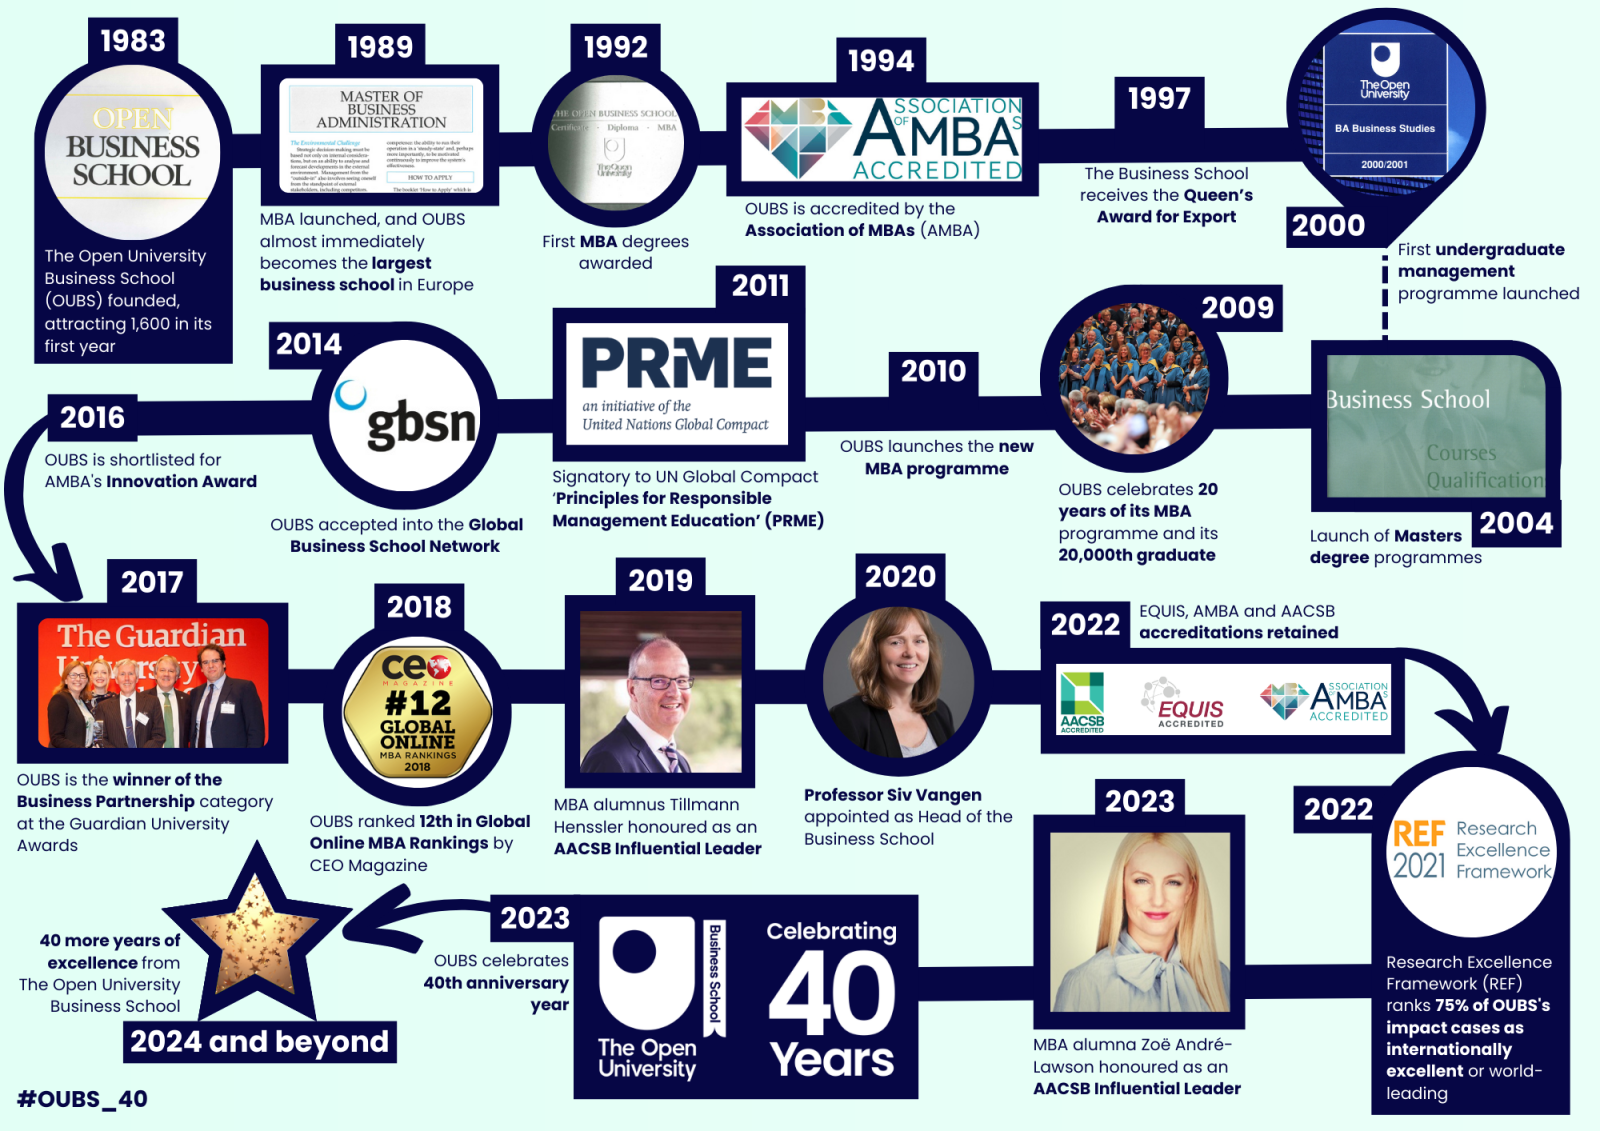  40 more years of excellence from The Open University Business School. Finally, the #OUBS_40 hashtag is shown in the bottom left-hand corner.